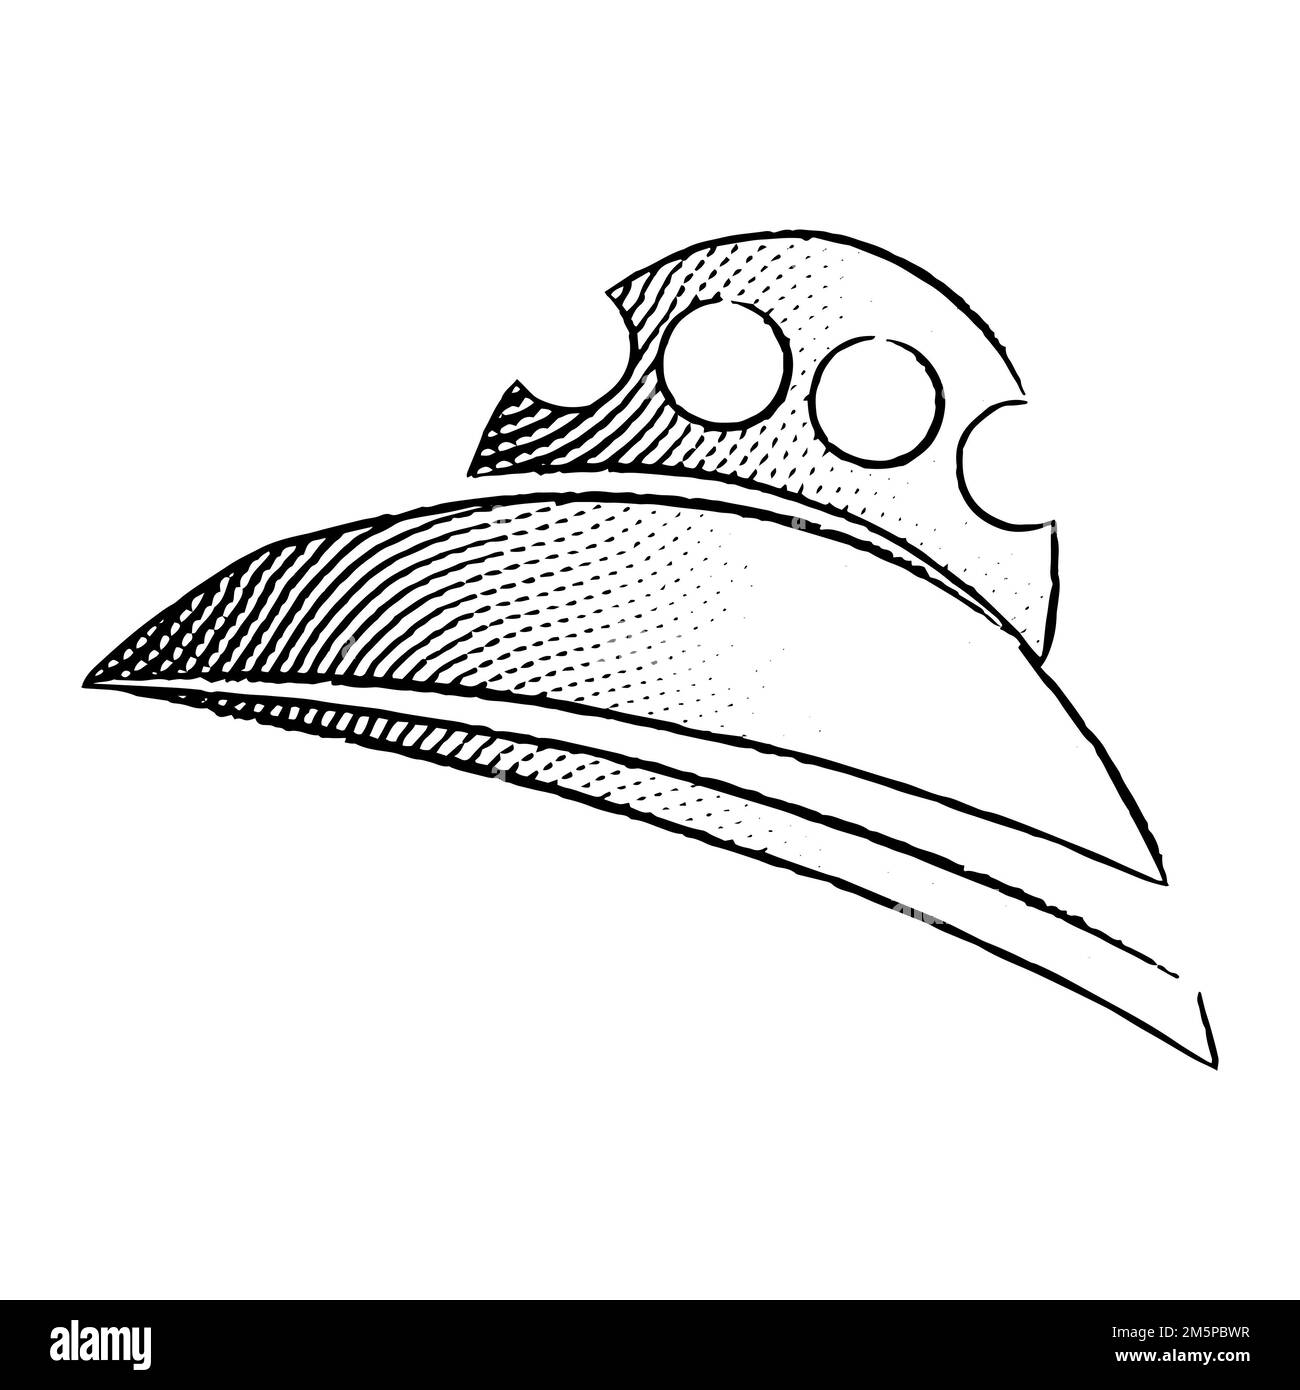 Illustration of Scratchboard Engraved Icon of Alien Ship isolated on a White Background Stock Photo